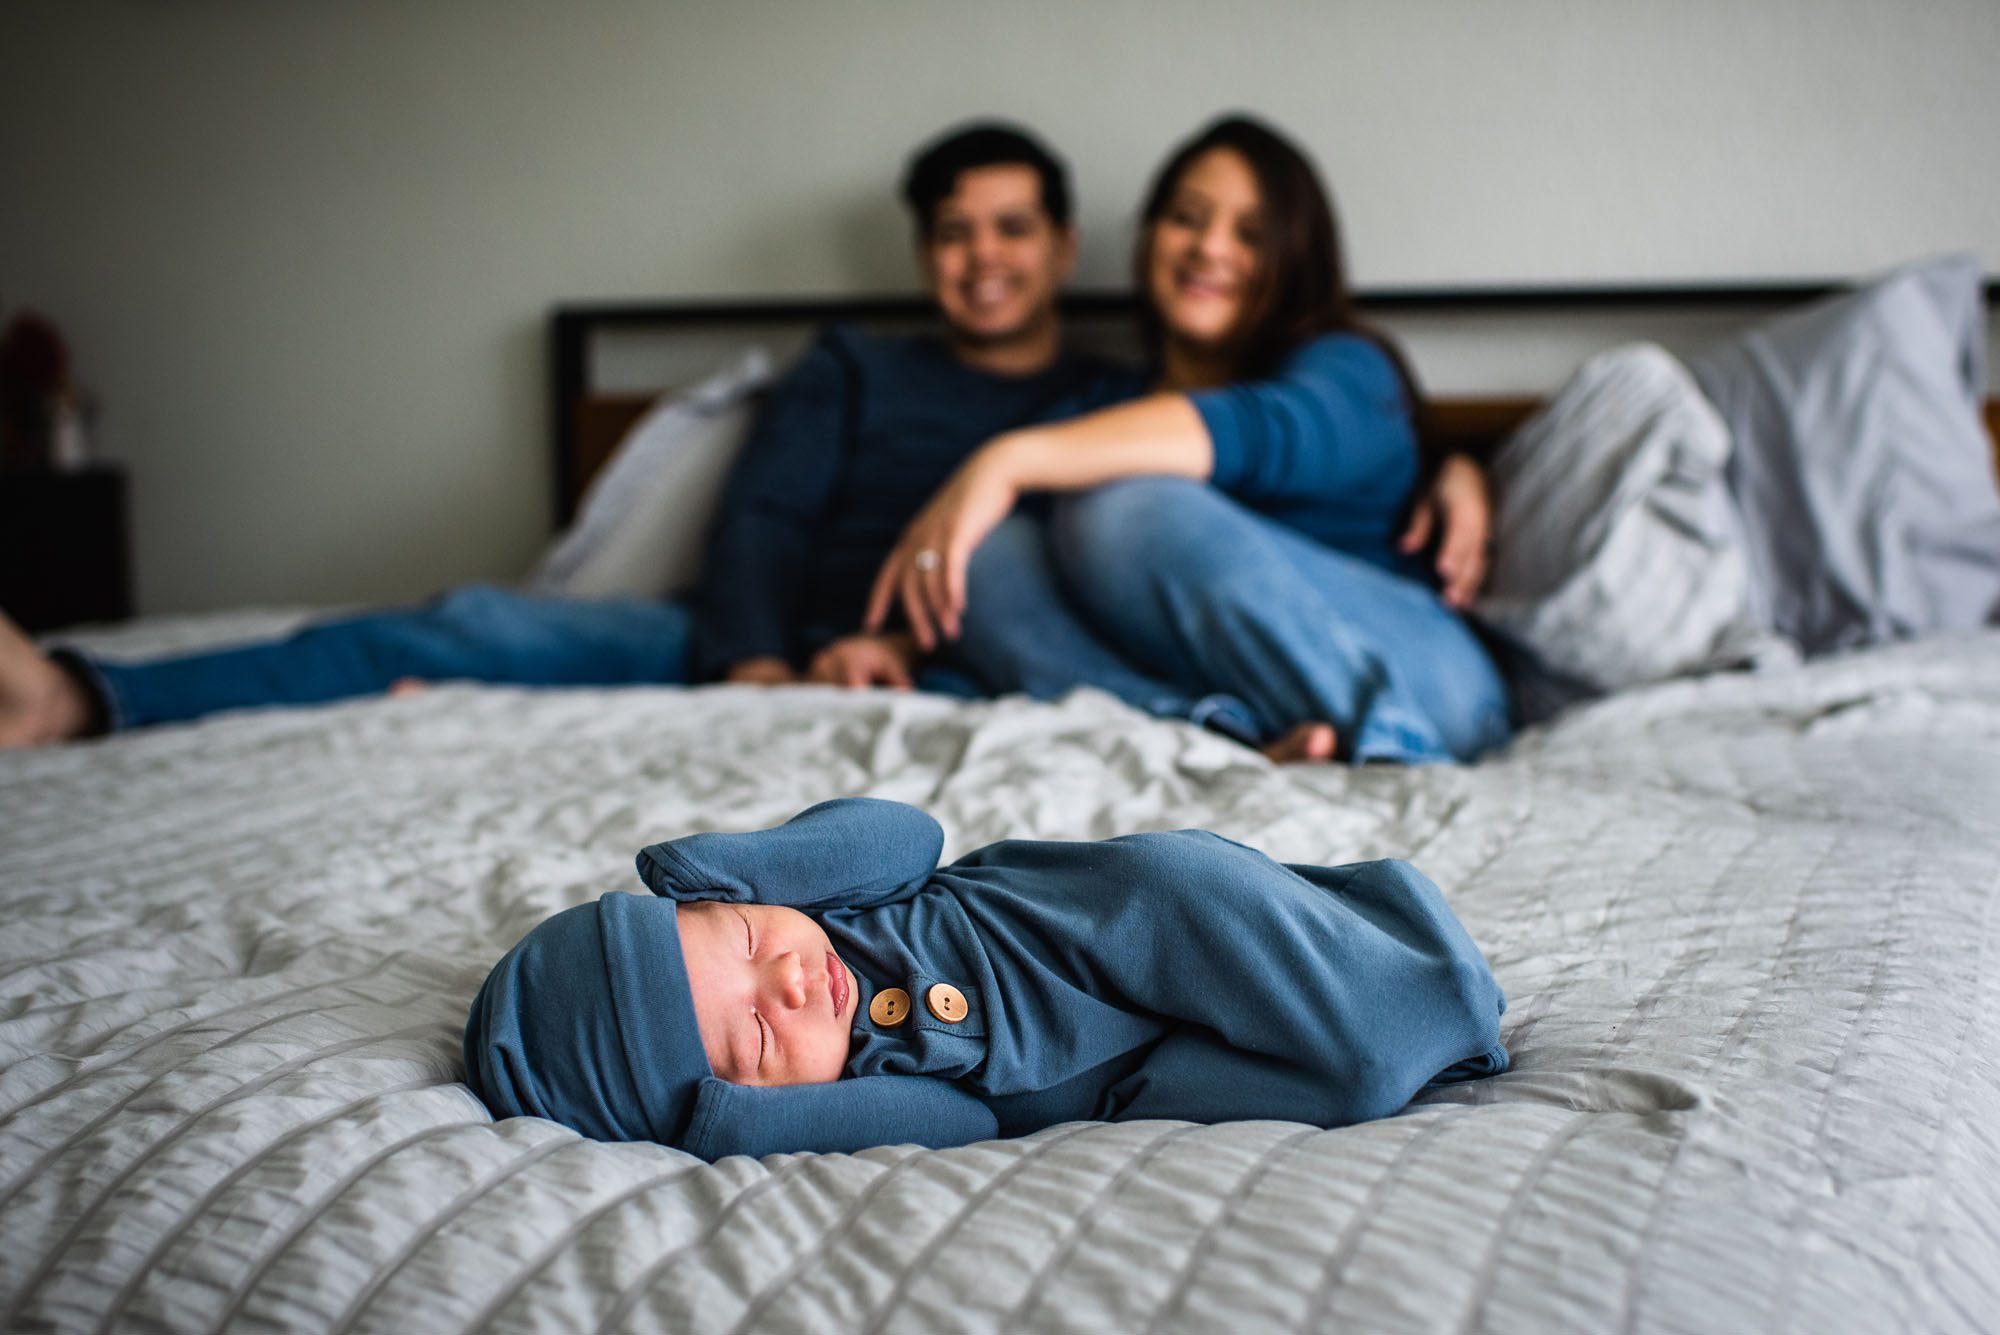 Newborn baby sleeping on bed with parents in the background, San Antonio Lifestyle Newborn Photographer